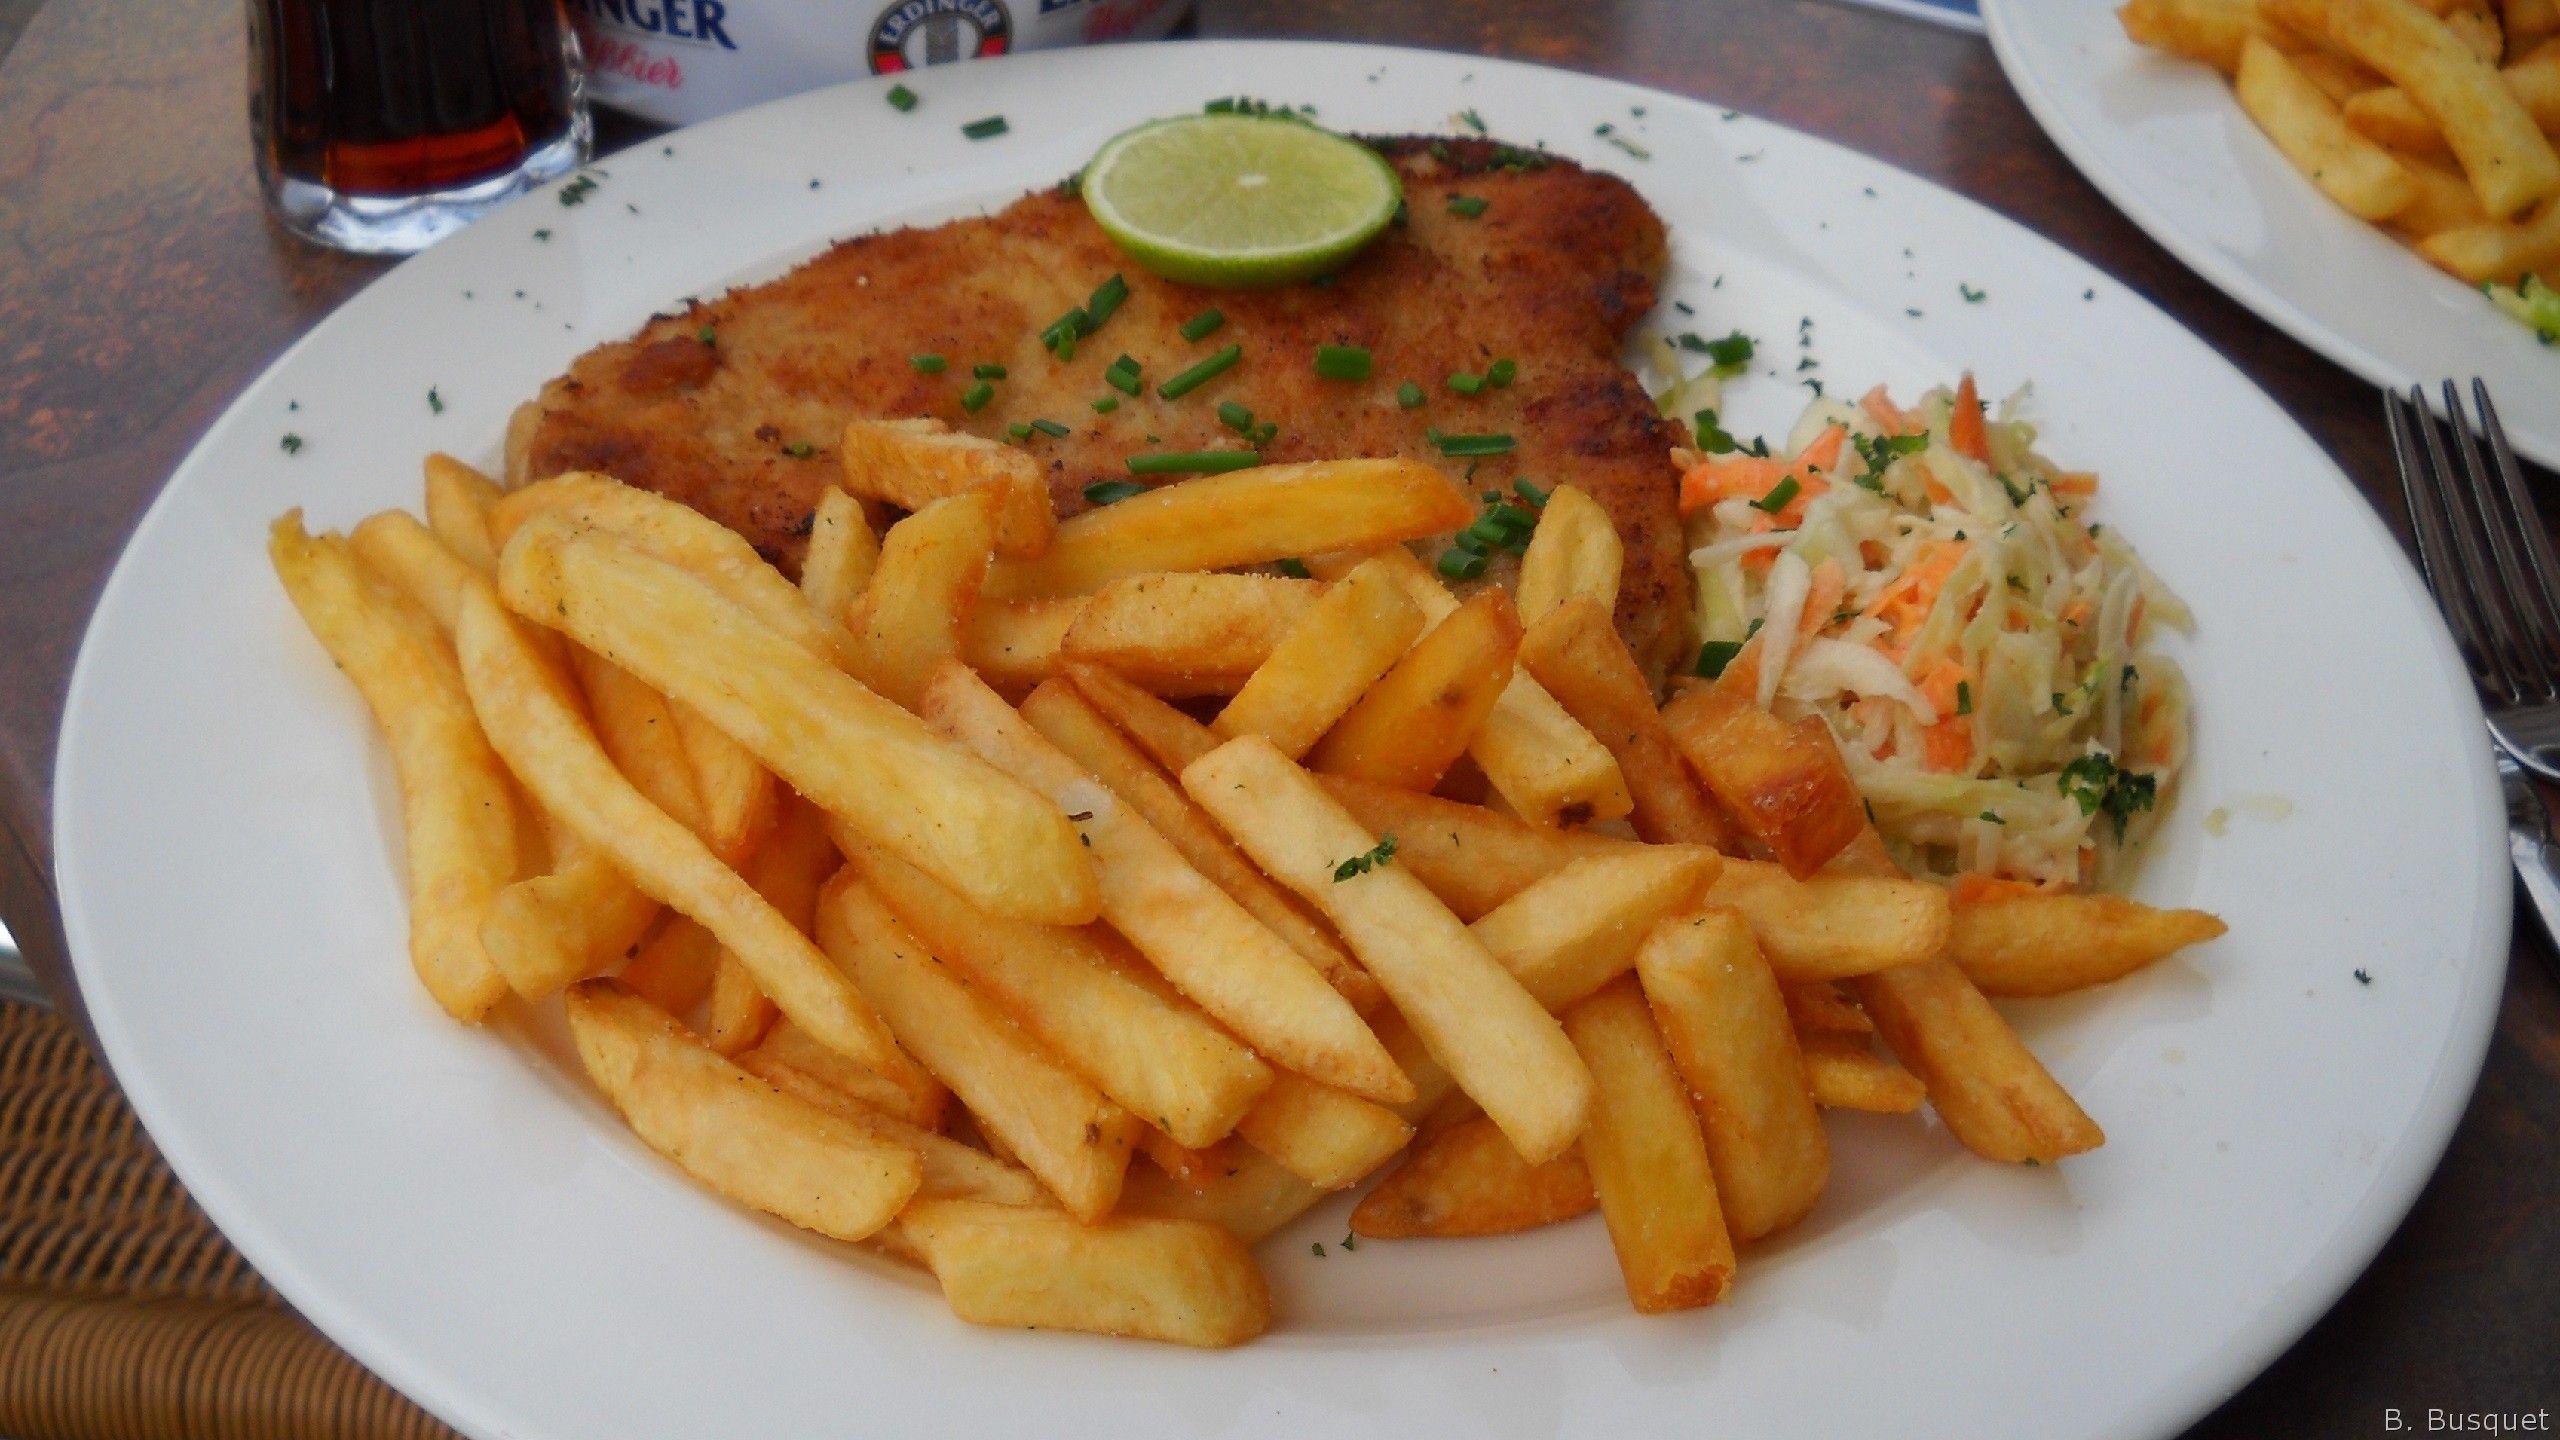 Schnitzel and french fries HD Wallpaper